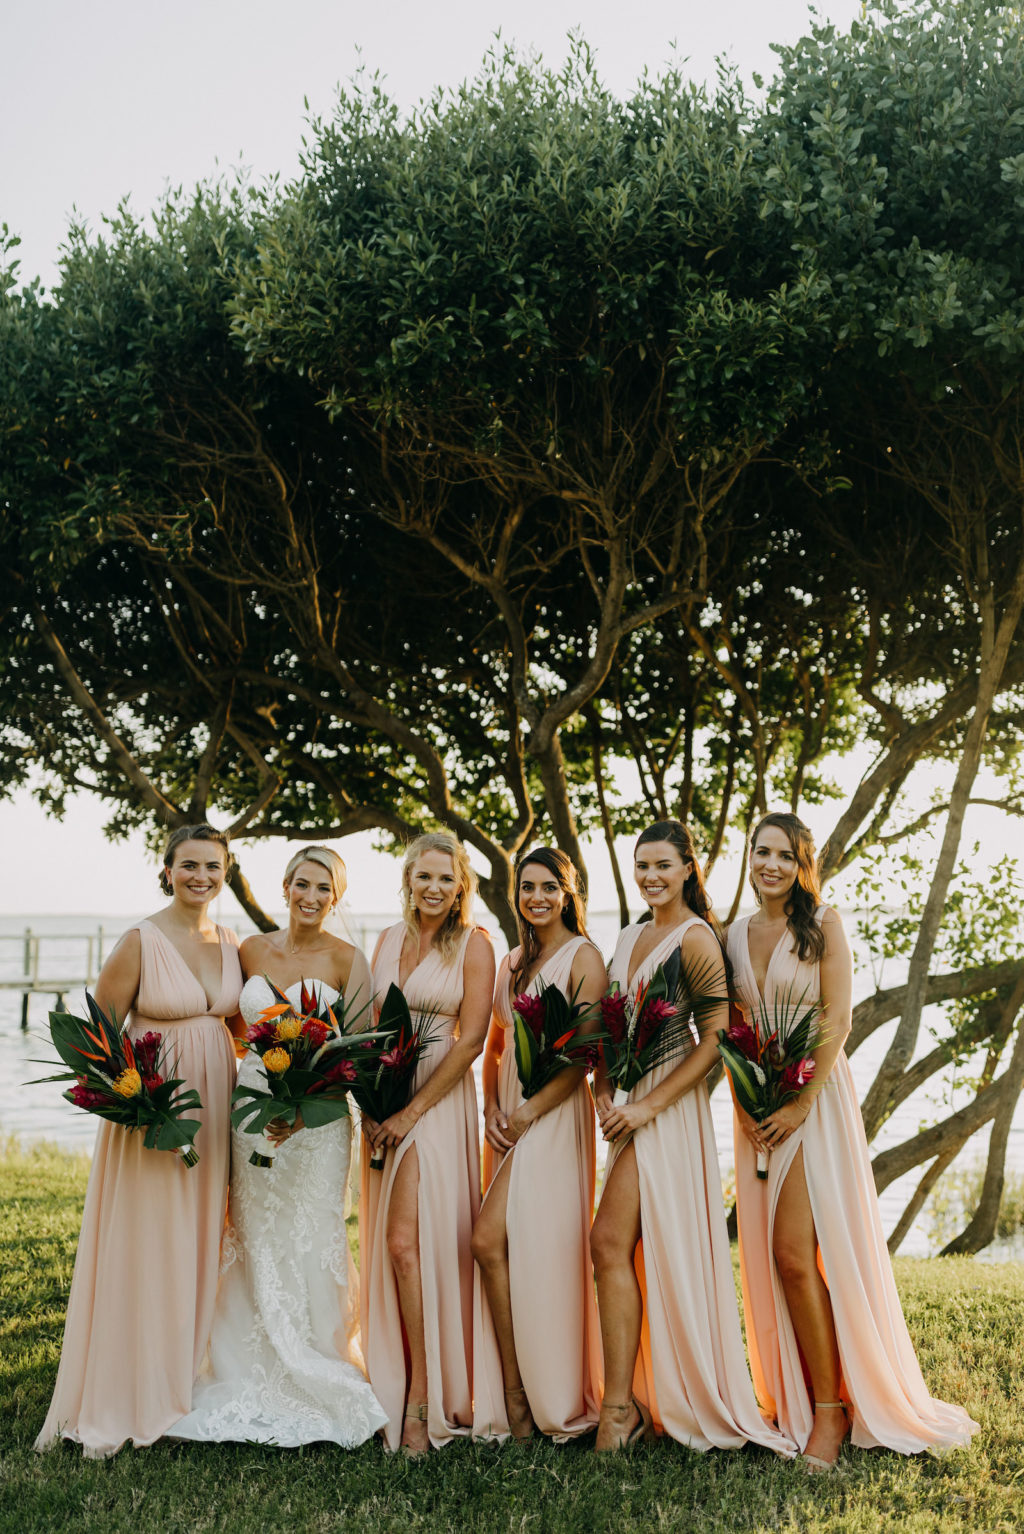 Florida Tropical Elegant Bridesmaids in Matching Blush Pink Dresses with High Leg Slit, Pink Ginger, Orange Birds of Paradise, Yellow and Red Pincushion Protea, Palm Leaves Floral Bouquets | Tampa Bay Wedding Photographer Amber McWhorter Photography